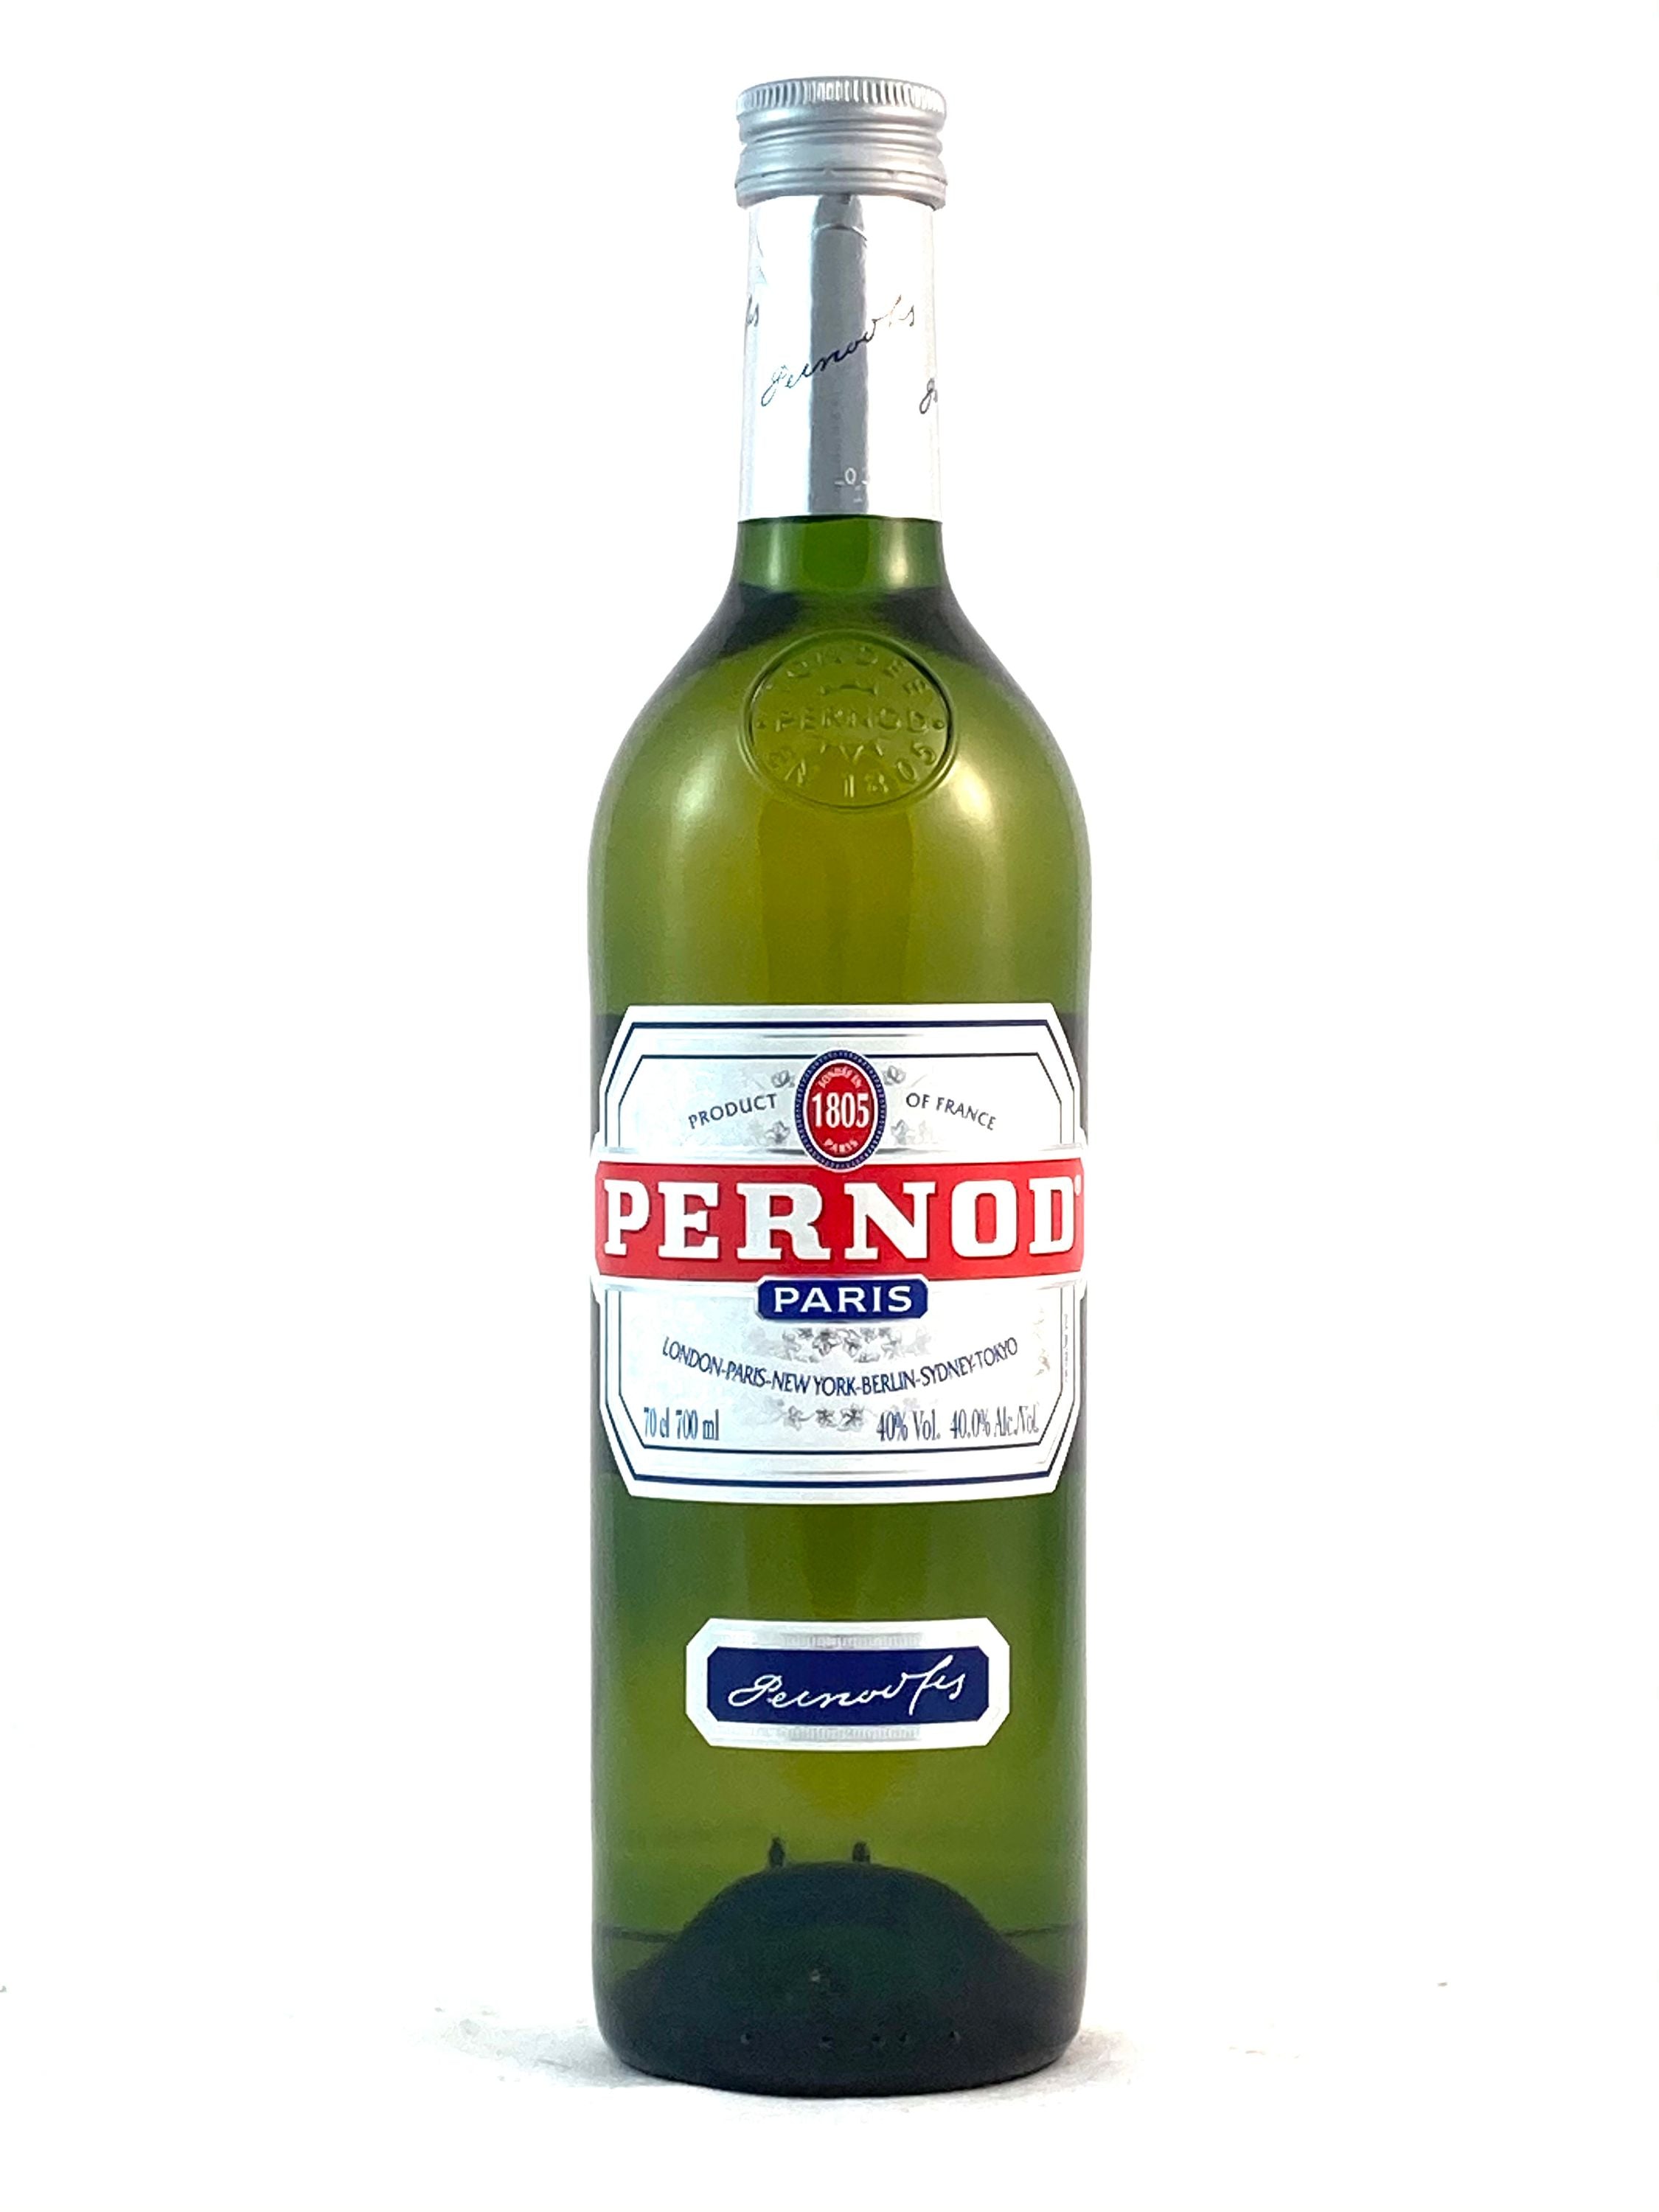 Pernod 0.7l, alc. 40% by volume, aniseed spirit France